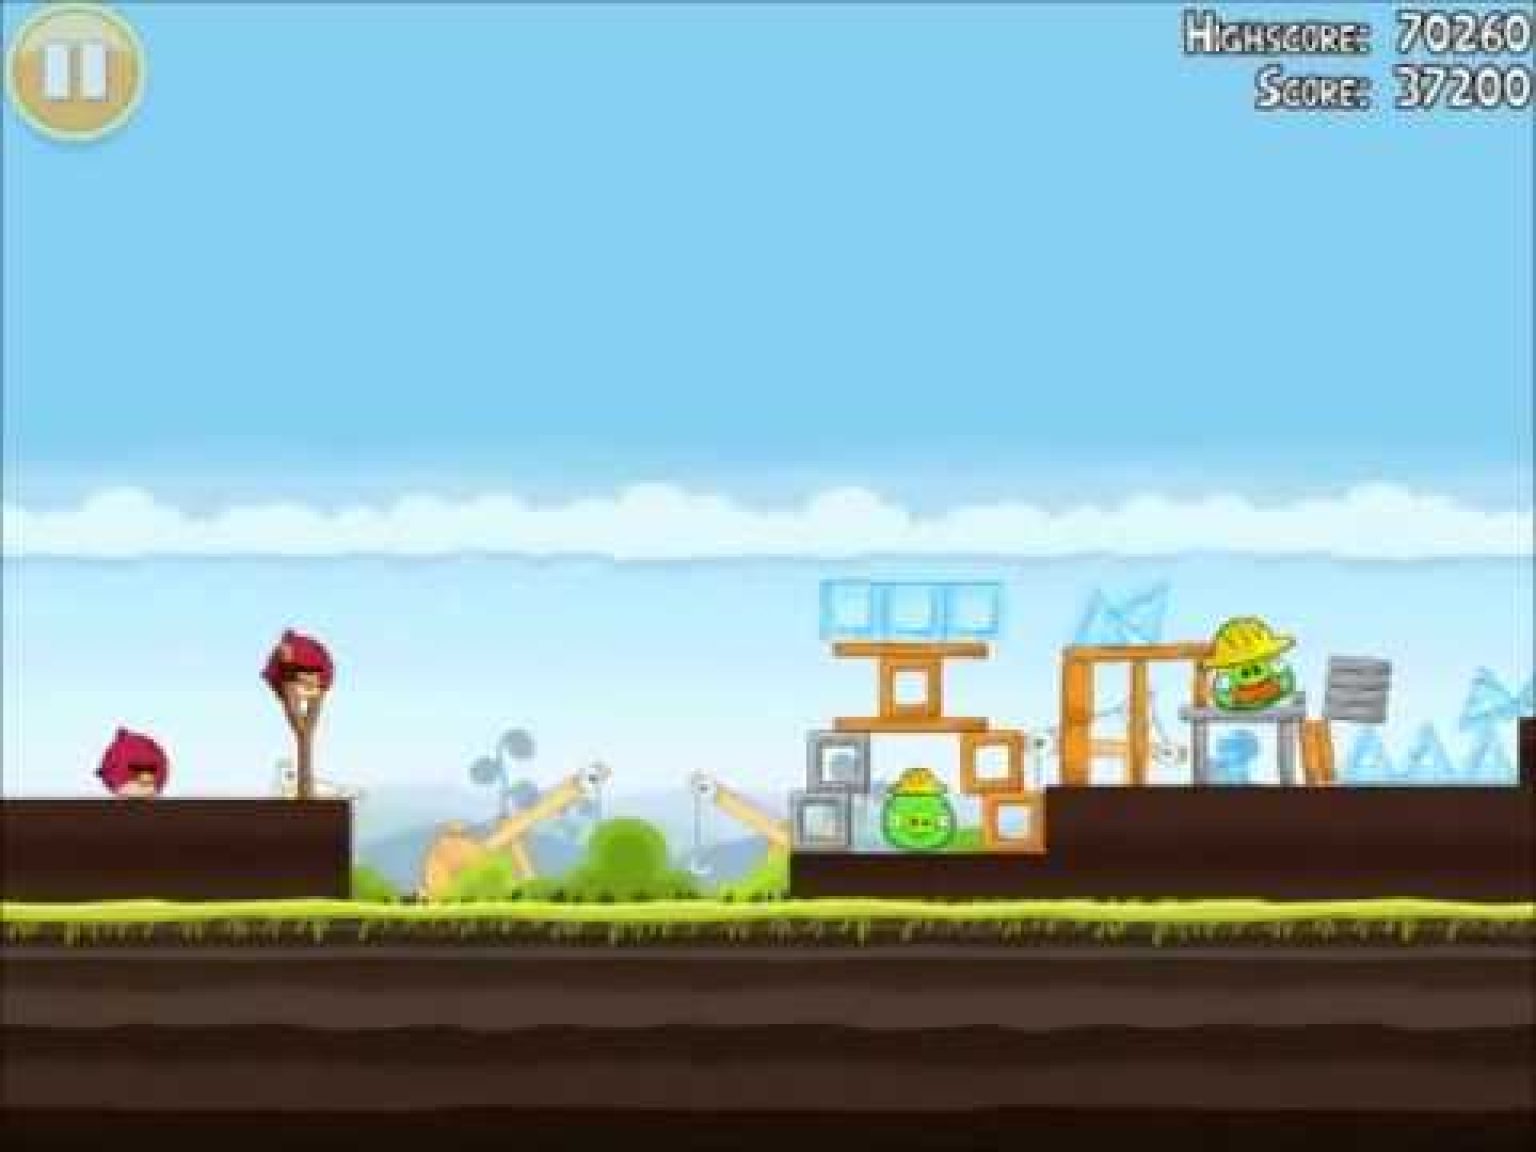 angry birds game free download for pc full version with crack